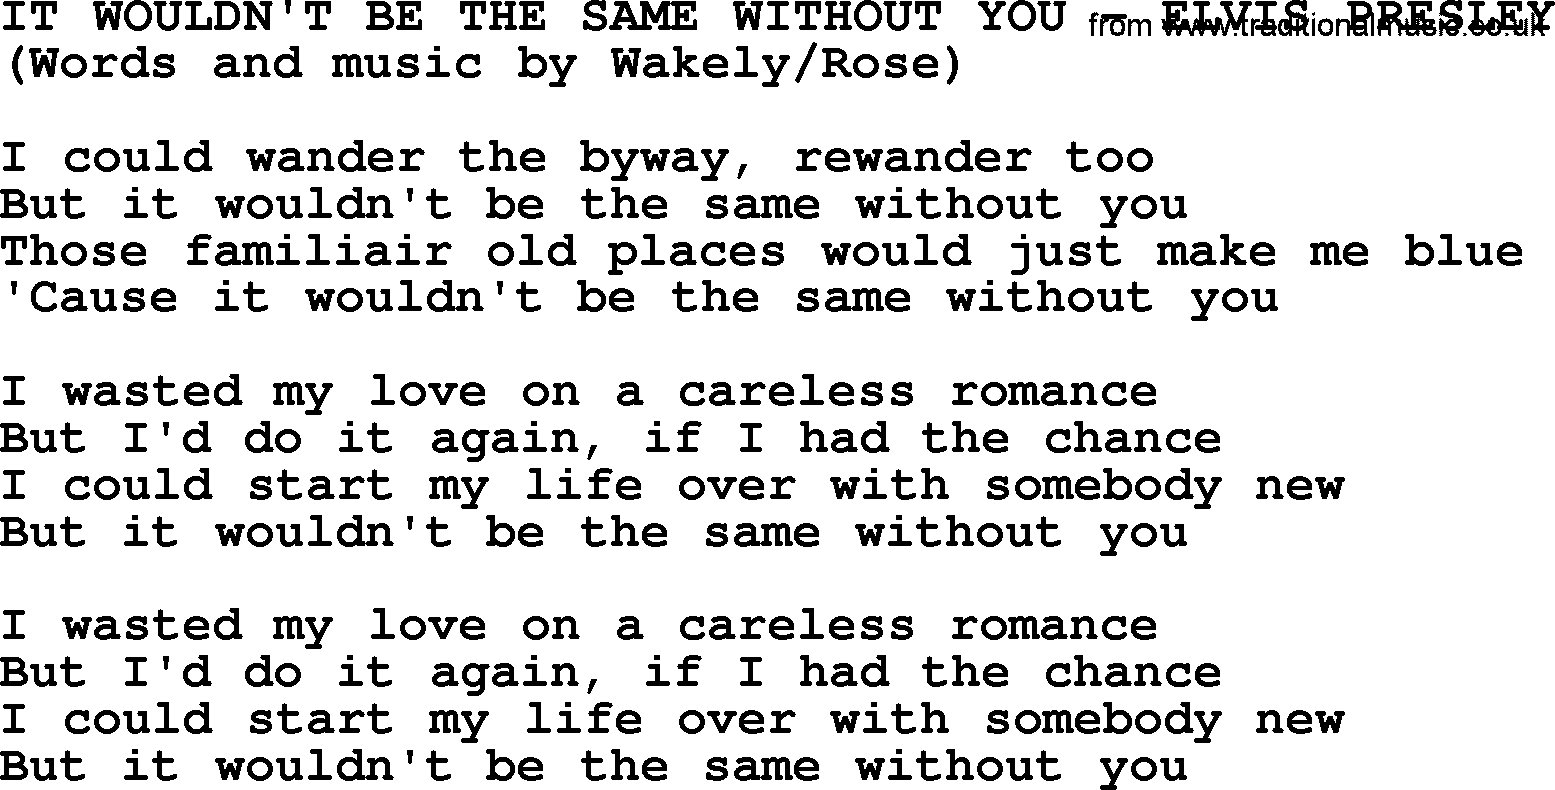 Elvis Presley song: It Wouldn't Be The Same Without You lyrics